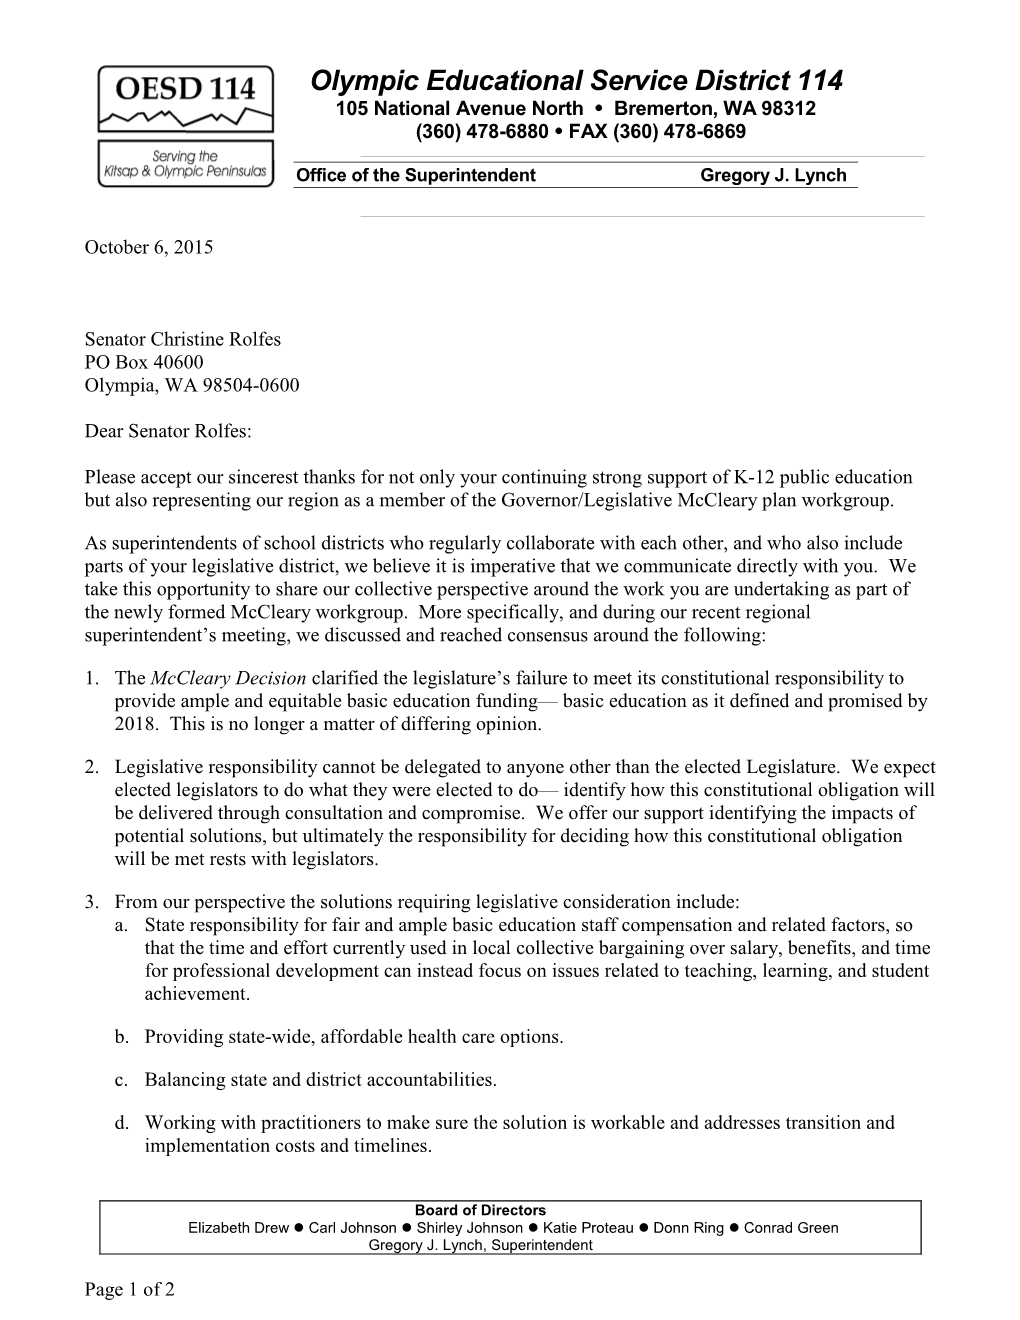 OESD 114 Superintendent Letter of Support